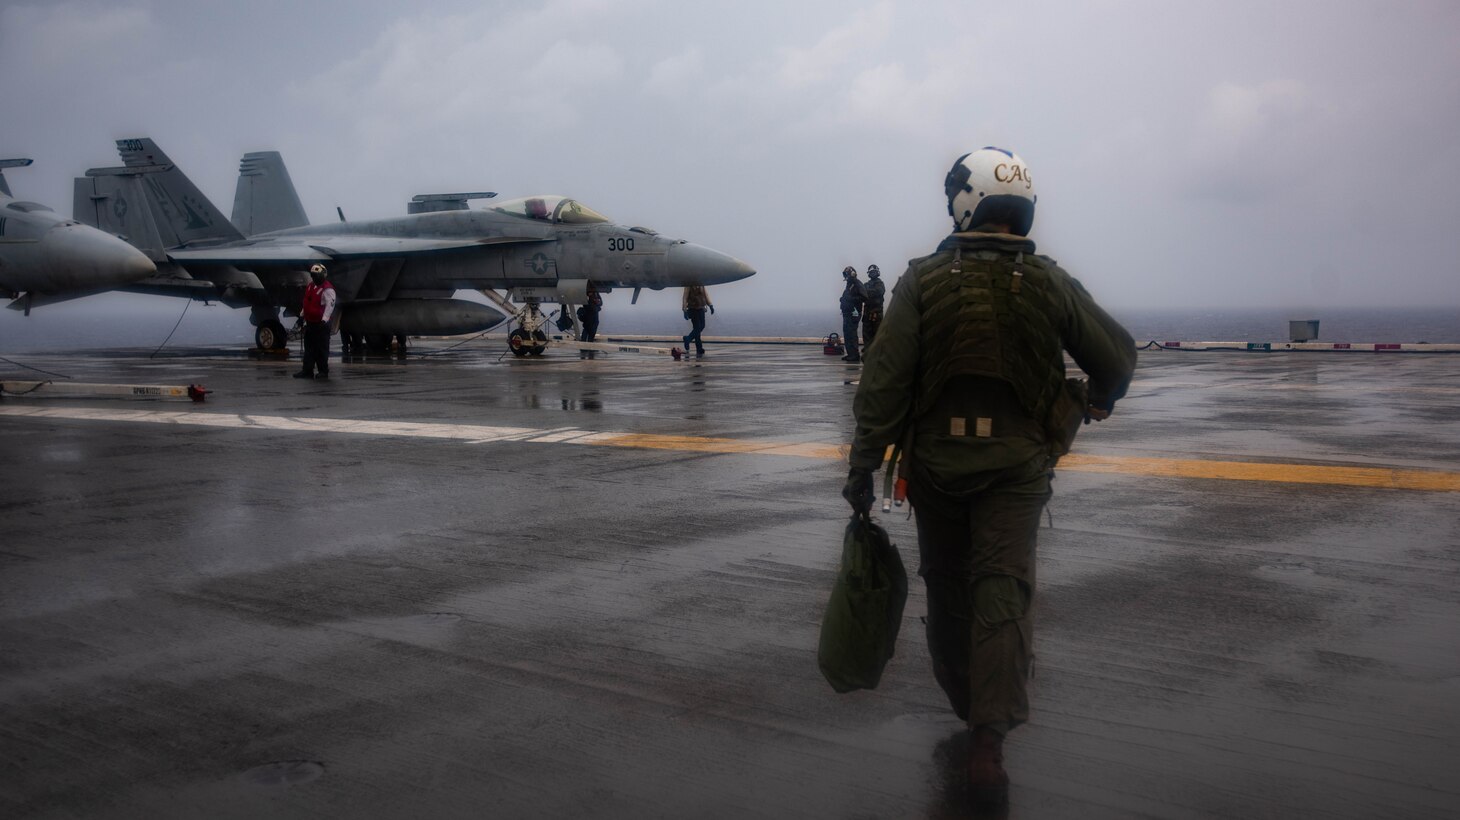 PHILIPPINE SEA (August 2, 2019) Capt. Forrest Young, Commander, Carrier Air Wing 5, walks toward his aircraft on the flight deck of the Navy’s forward-deployed aircraft carrier USS Ronald Reagan (CVN 76) prior to conducting an in-flight change of command ceremony. Young was relieved as commanding officer of Carrier Air Wing (CVW) 5 by Capt. Michael Rovenolt. Ronald Reagan, the flagship of Carrier Strike Group Five, provides a combat-ready force that protects and defends the collective maritime interests of its allies and partners in the Indo-Pacific region.